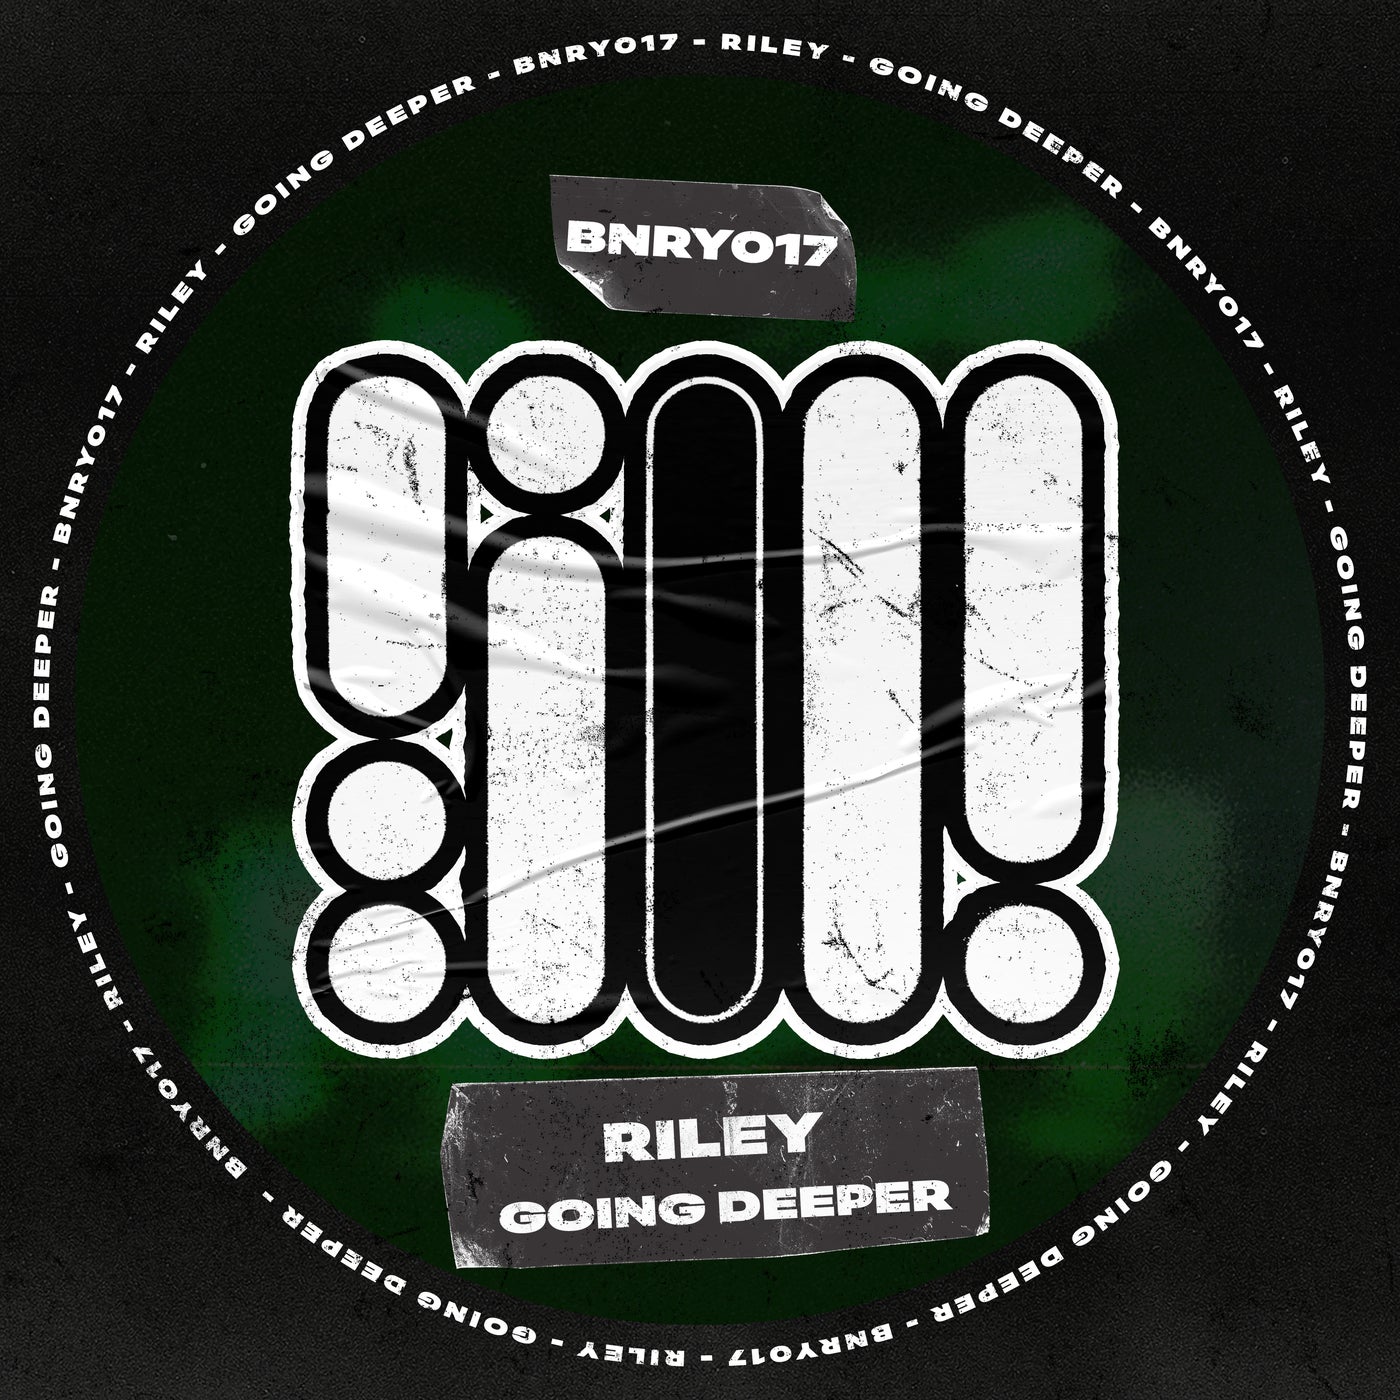 image cover: RILEY (UK) - Going Deeper on BINARY